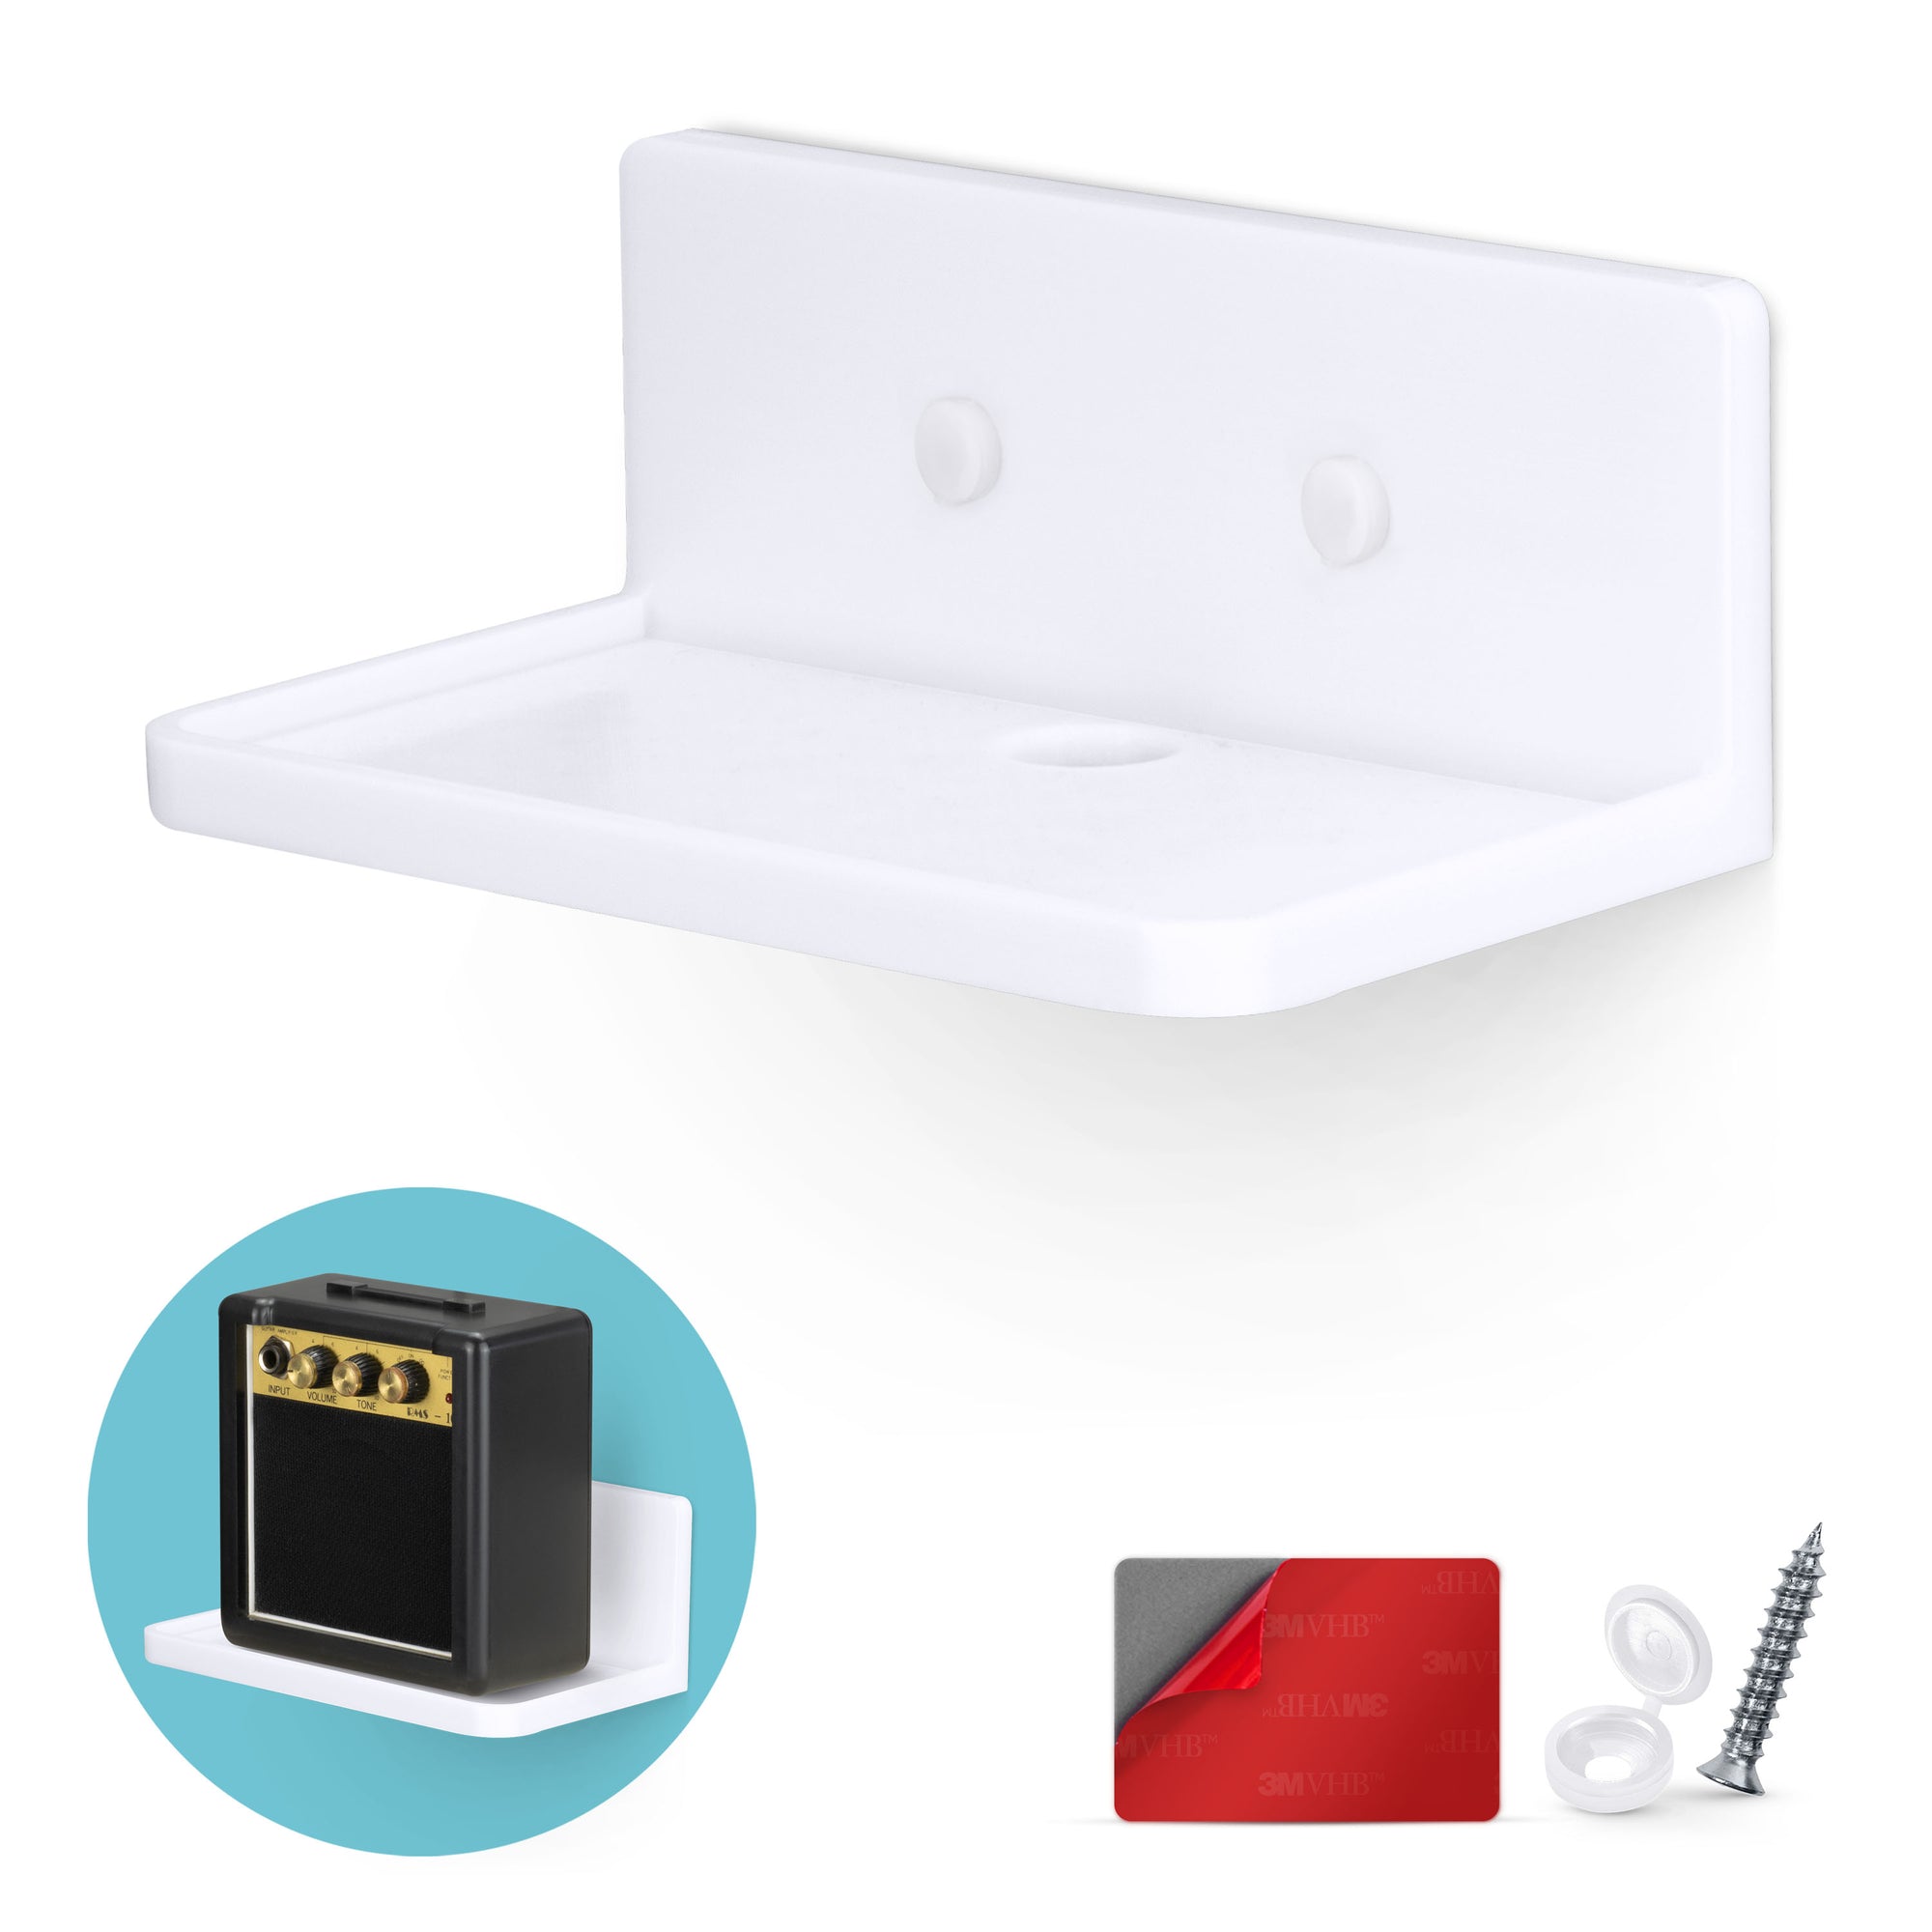 6.5” Small Floating Shelf, Adhesive & Screw In, for Bluetooth Speakers, Cameras, Plants, Toys & More, Universal Holder, Easy to Install (SHELF RF2106.5, White)